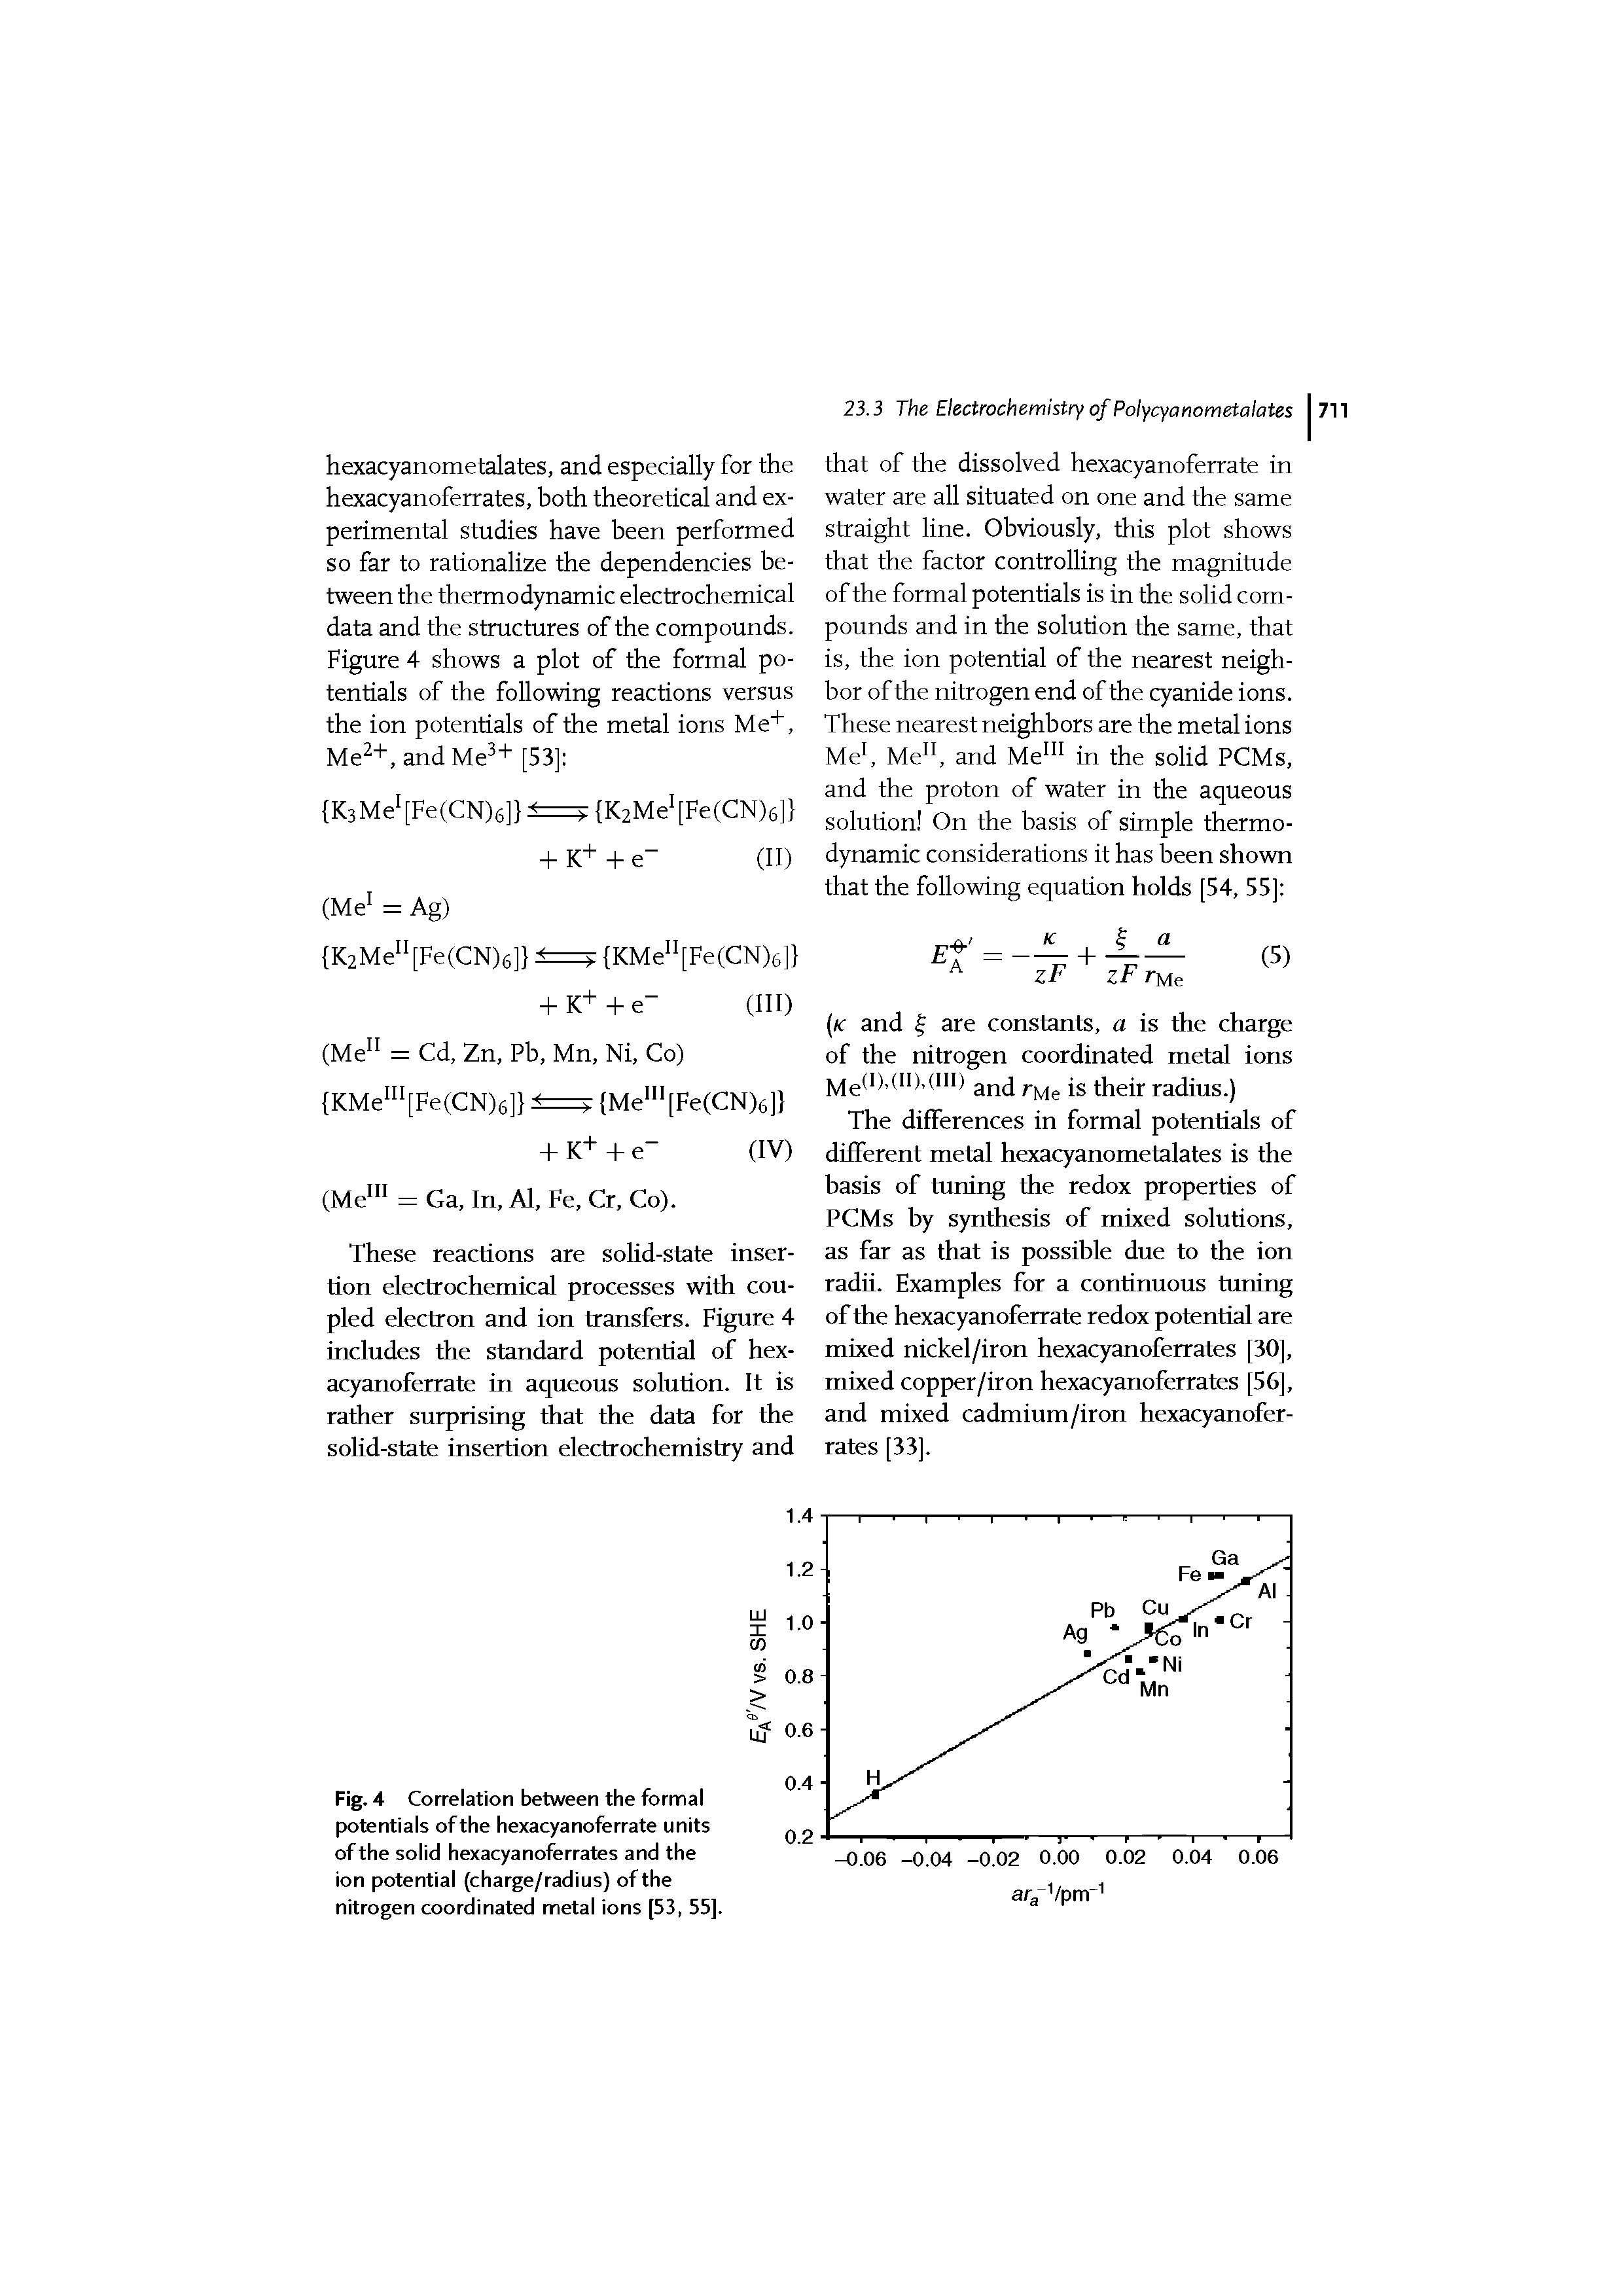 Fig. 4 Correlation between the formal potentials of the hexacyanoferrate units of the solid hexacyanoferrates and the ion potential (charge/radius) of the nitrogen coordinated metal ions [53, 55].